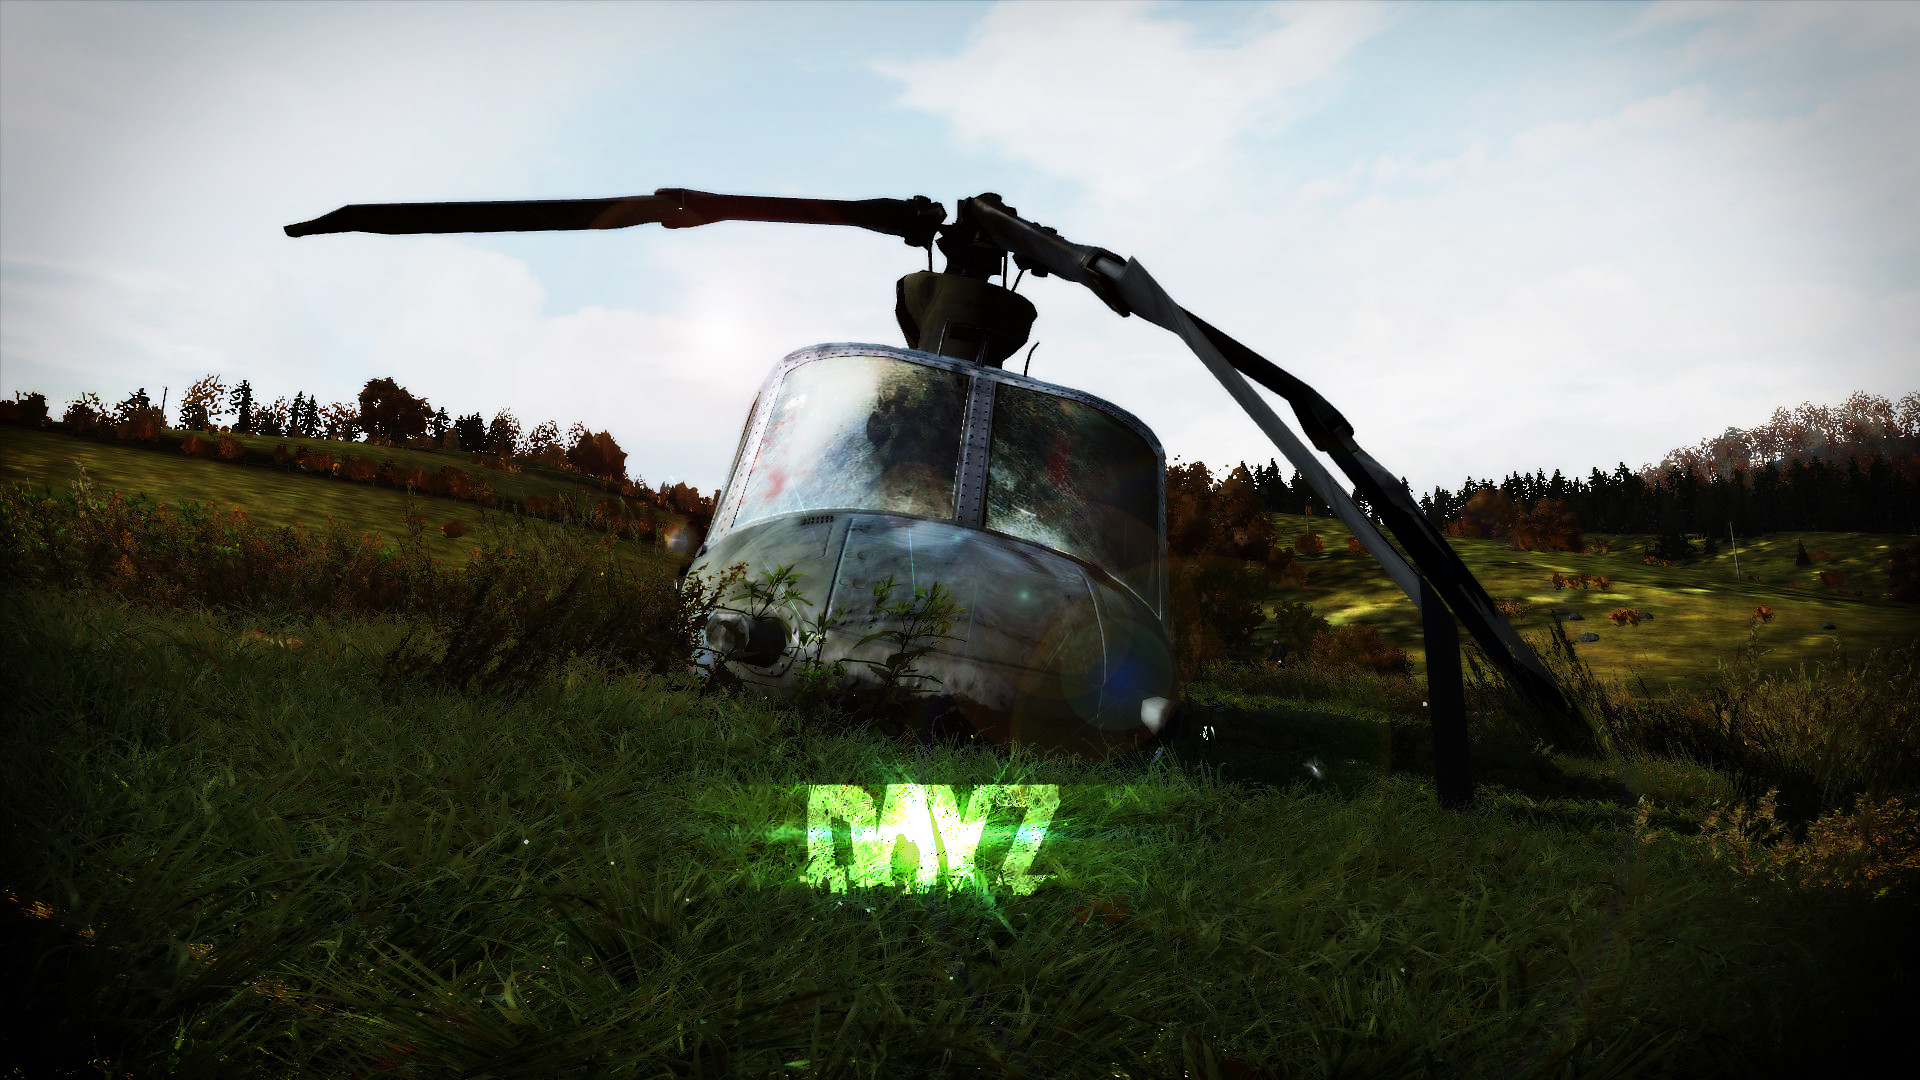 1920x1080 Download Dayz Game Helicopter Wallpaper